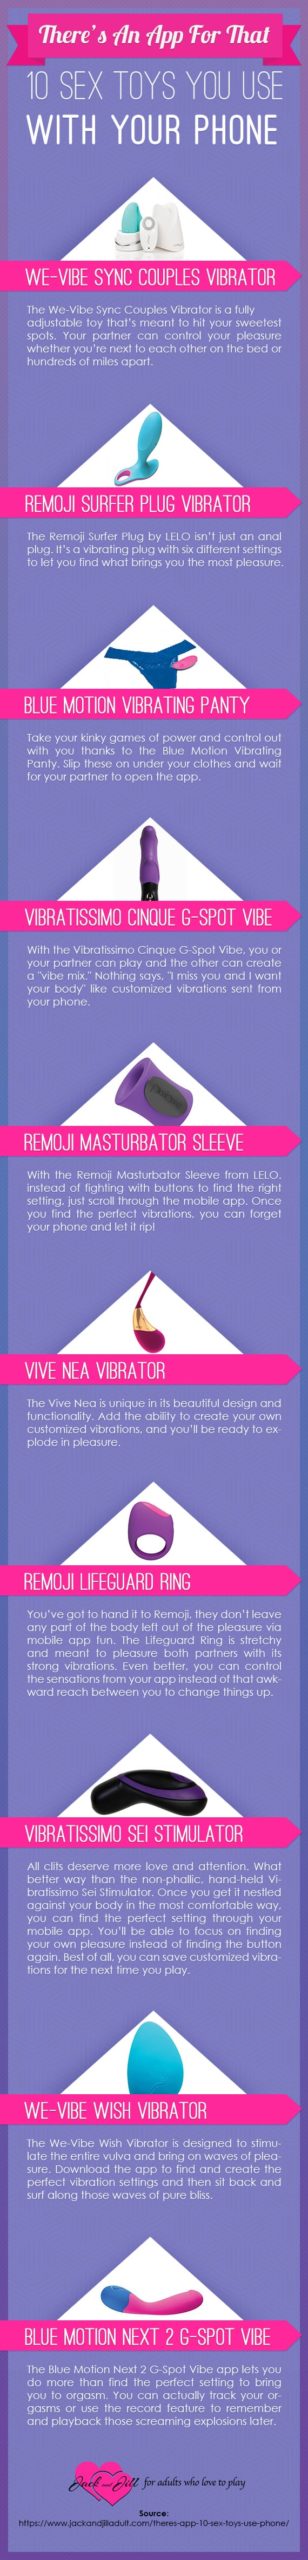 Infographic for 10 Sex Toys that Use a Mobile App